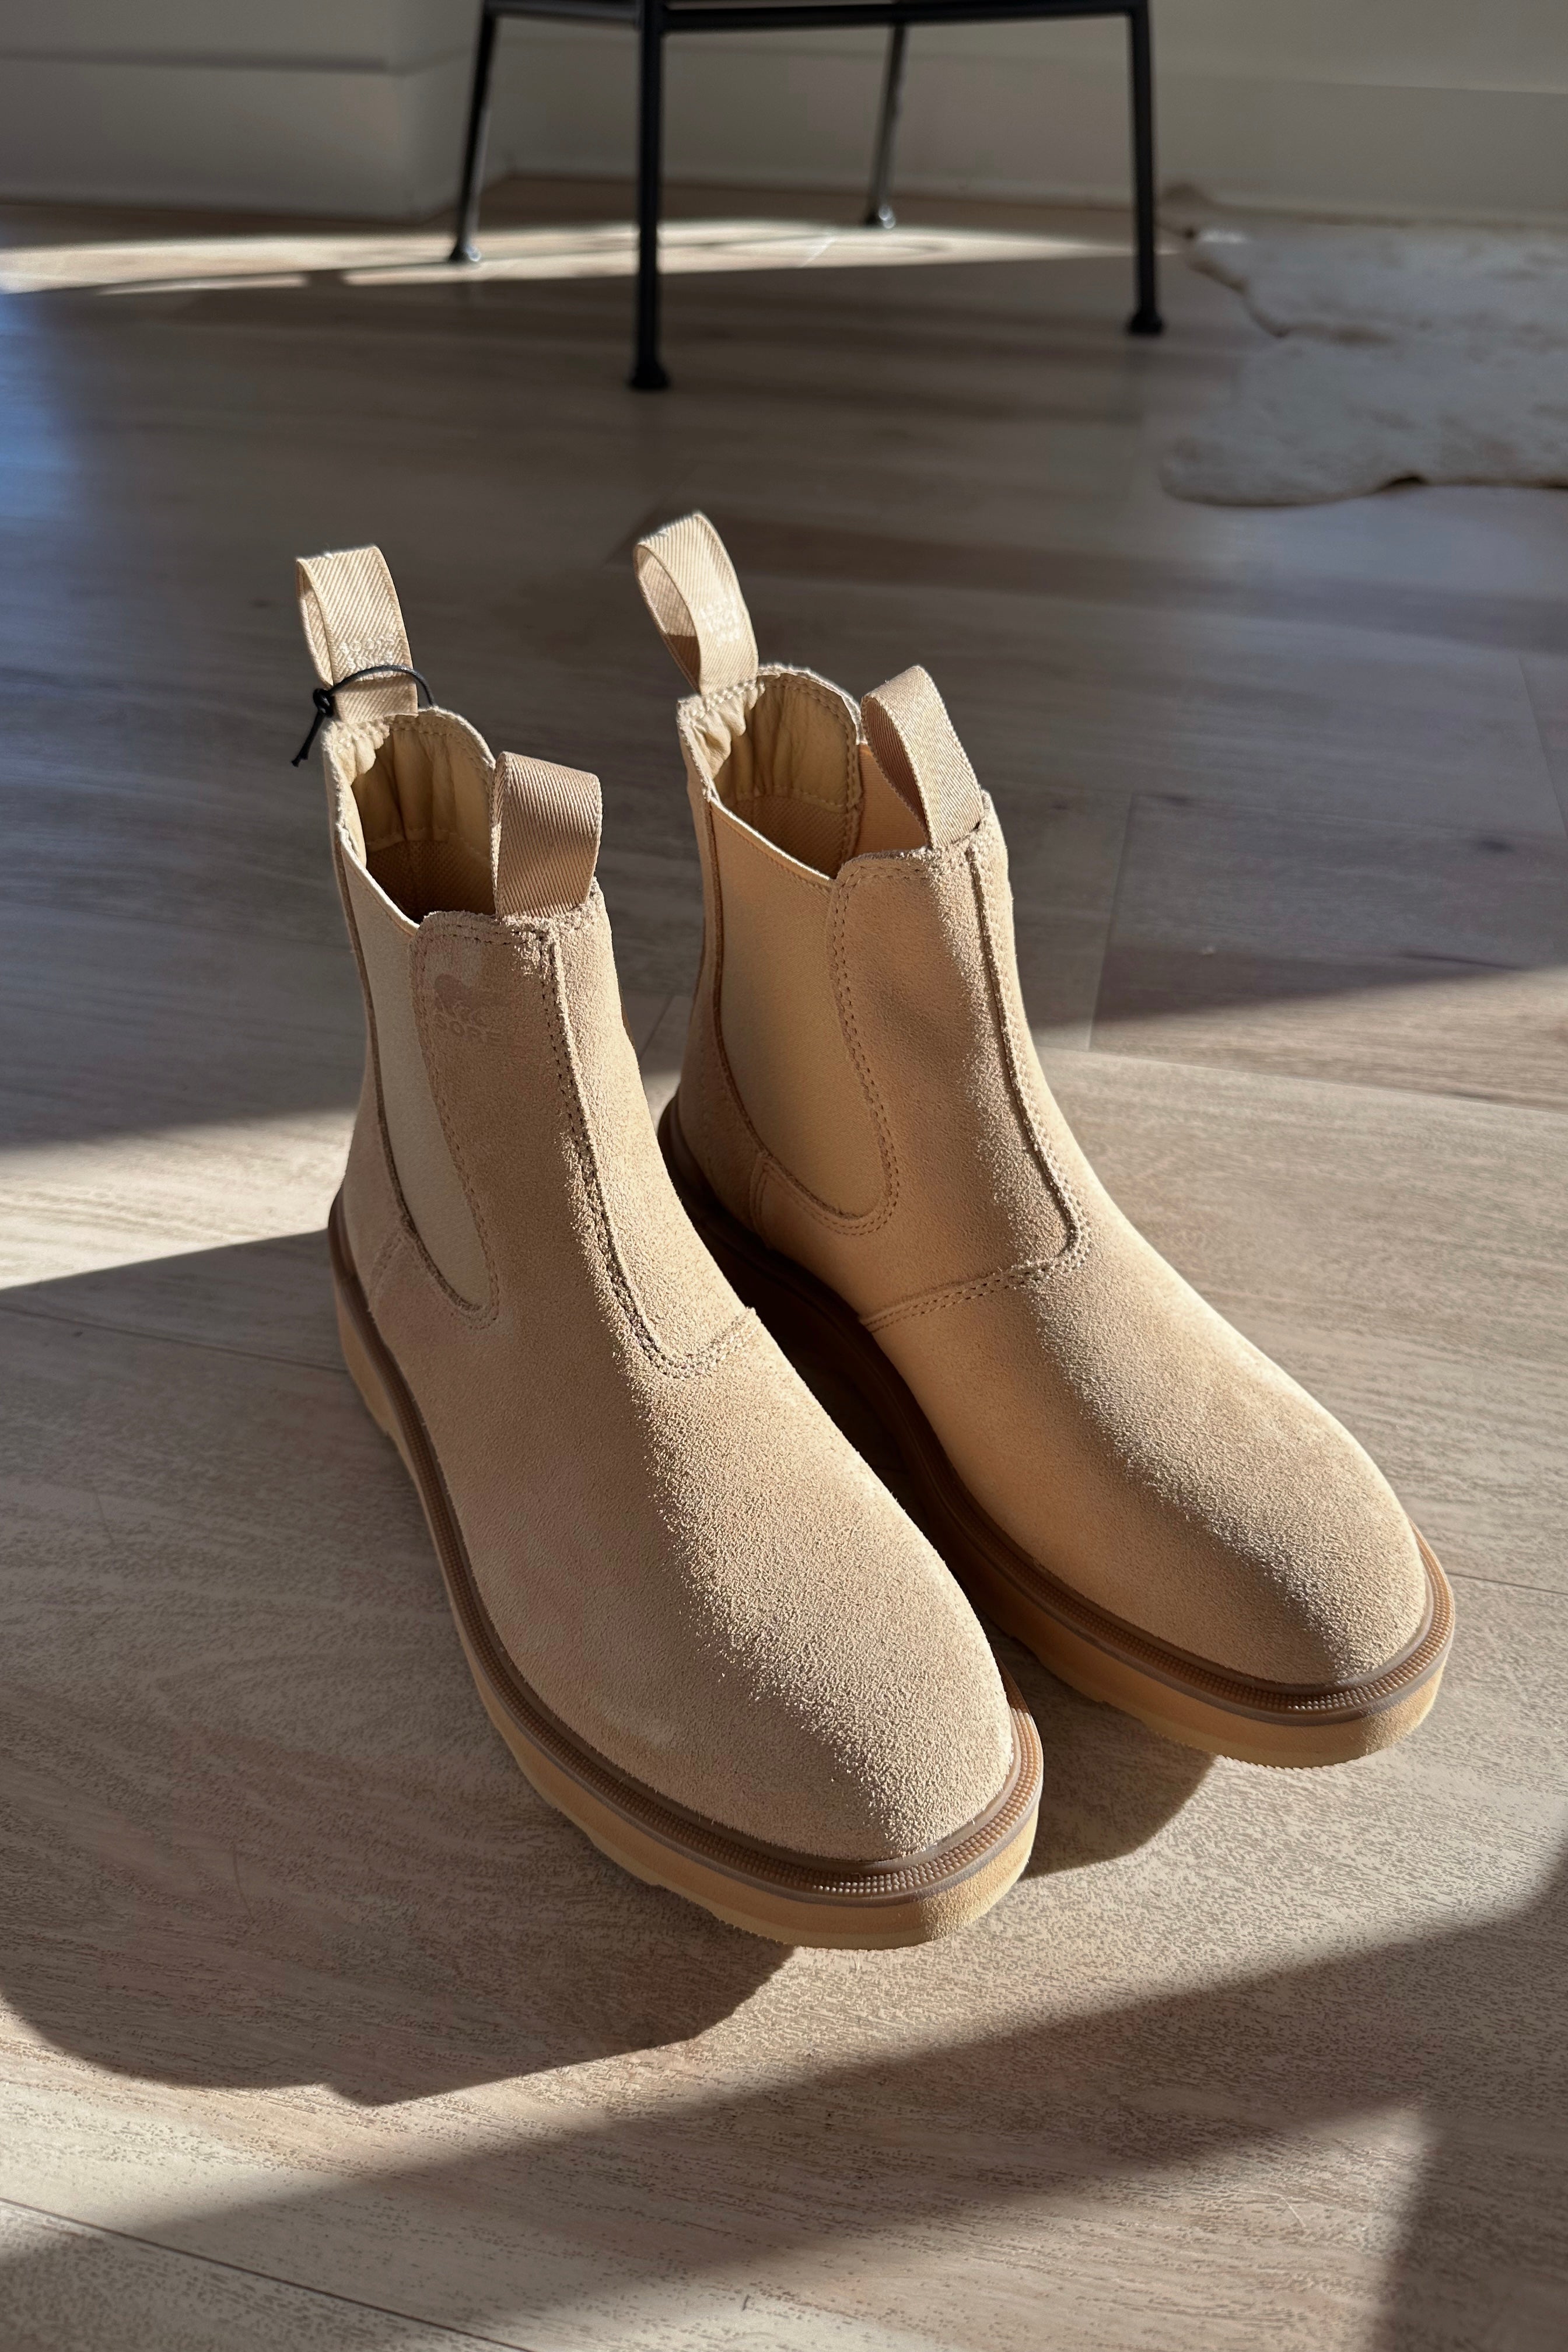 Front view of the Hi-Line Chelsea Boot in Canoe Ceramic which features tan waterproof suede, monochrome lightweight sole, stretch panels on each side, pull tabs, round toe, 1 inch platform height and 1 inch heel height